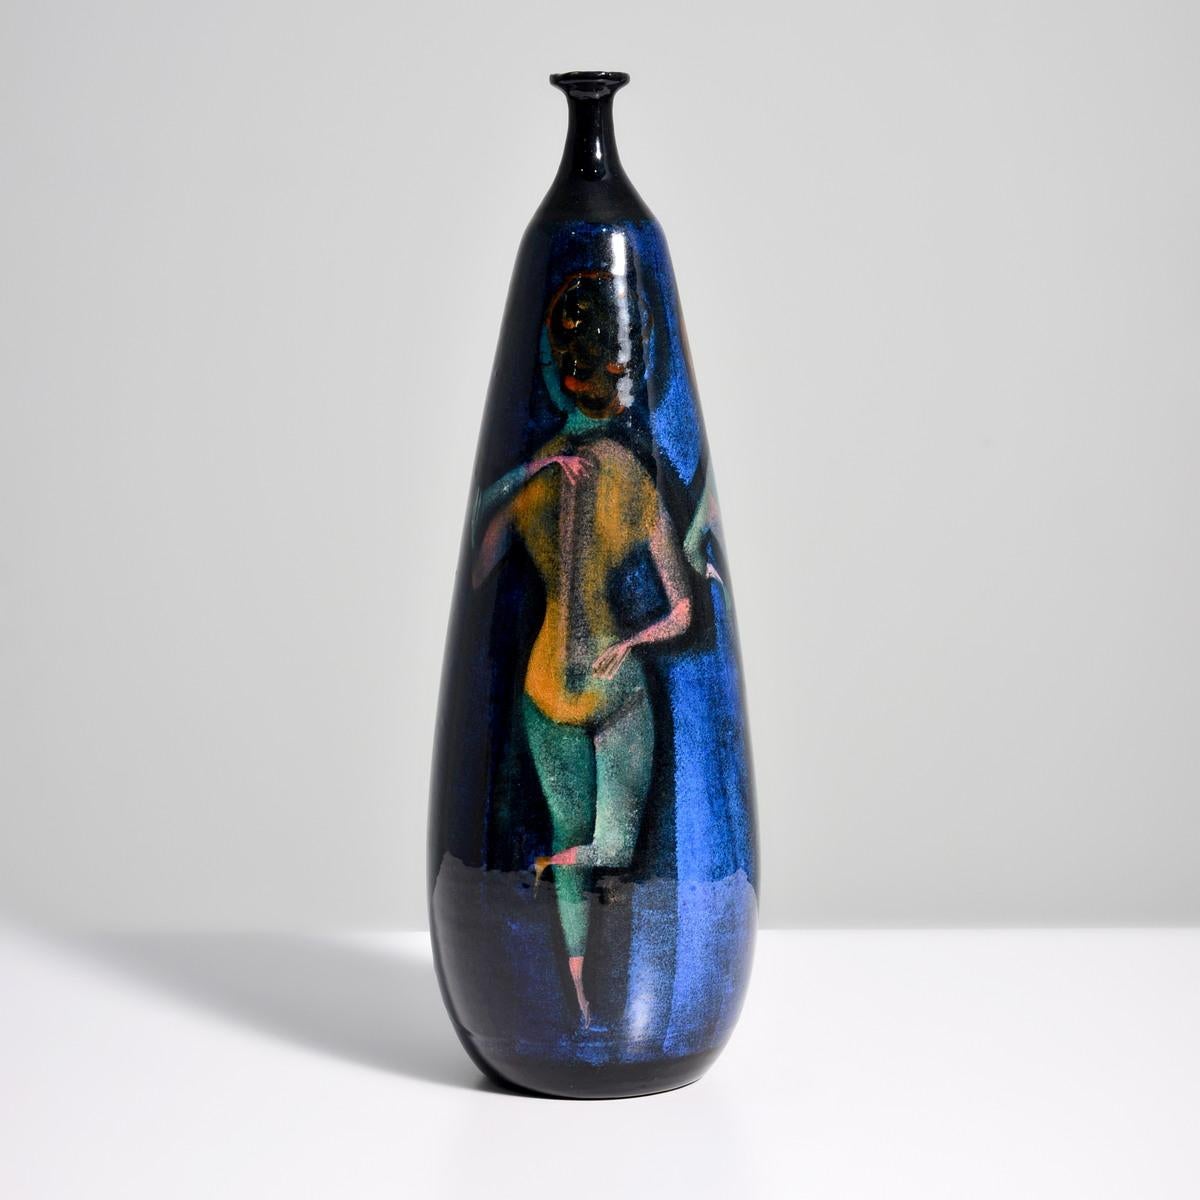 Artist/Designer: Polia Sunockin Pillin (Polish/American, 1909-1992)

Additional Information: Polia Pillin was a noteworthy ceramic artist blending craftsmanship with modern imagery.

Marking(s); notes: signed

Country of origin; materials: unknown;